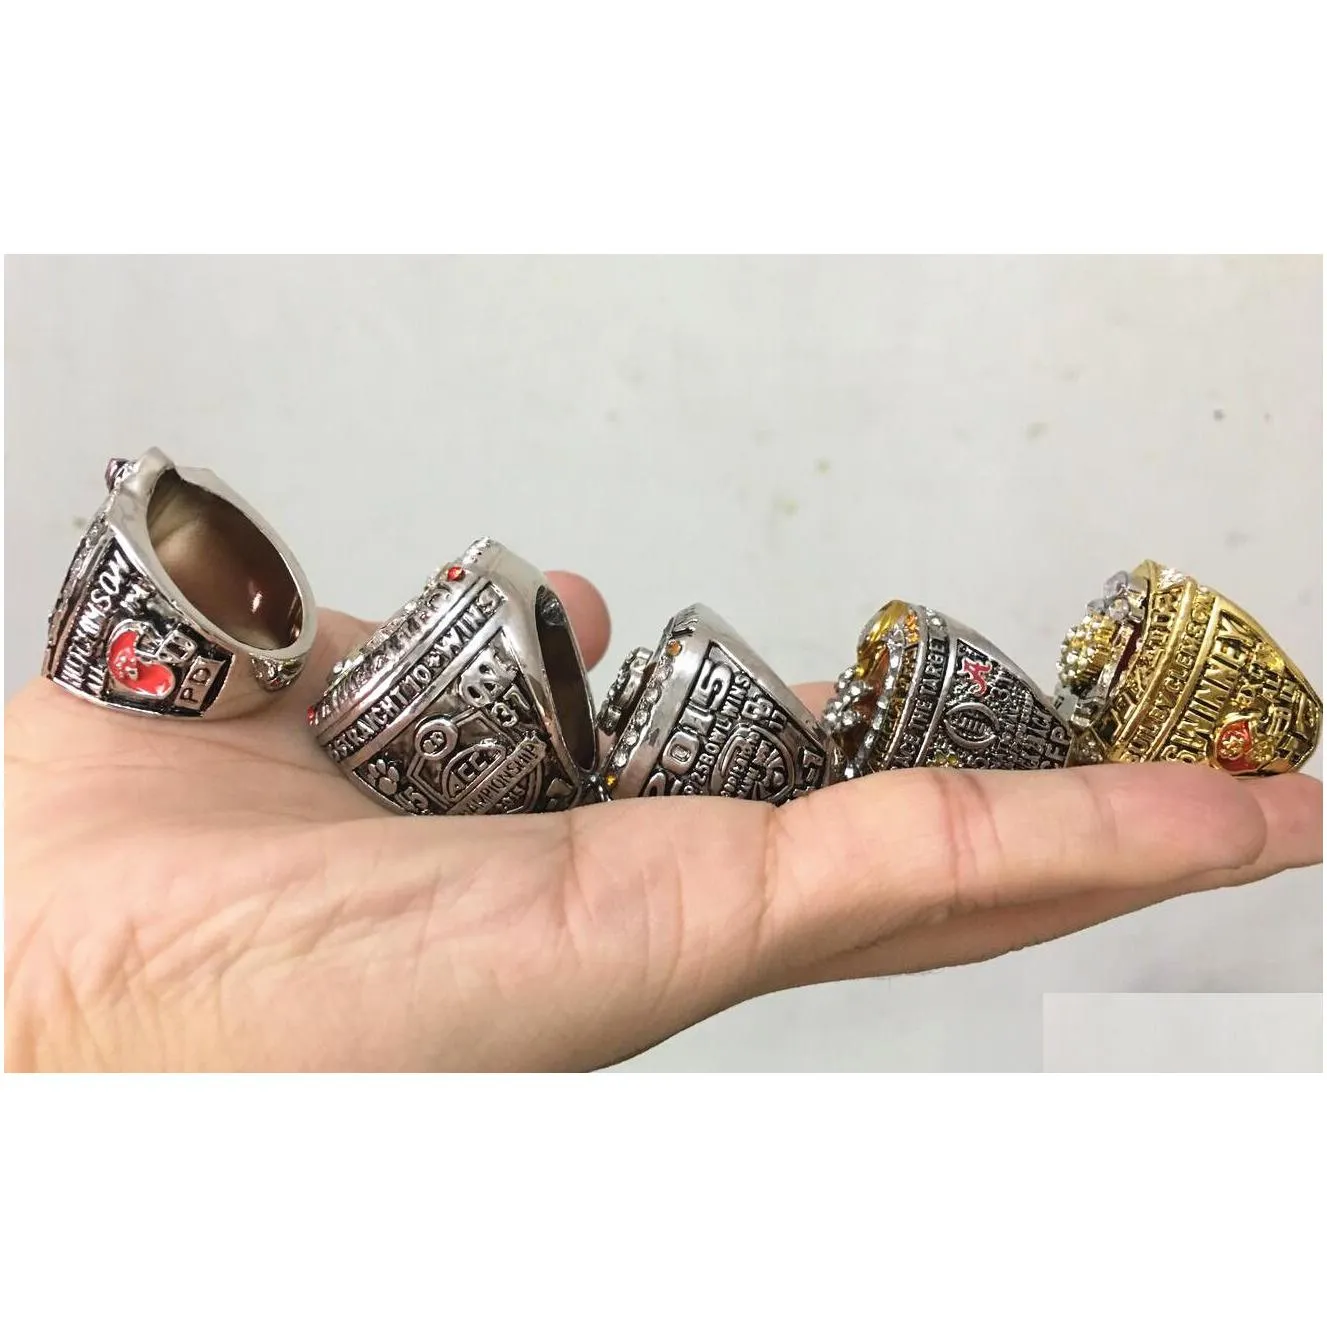 5pcs clemson tigers national championship ring set with wooden display box case fan gift 2019 wholesale drop shipping